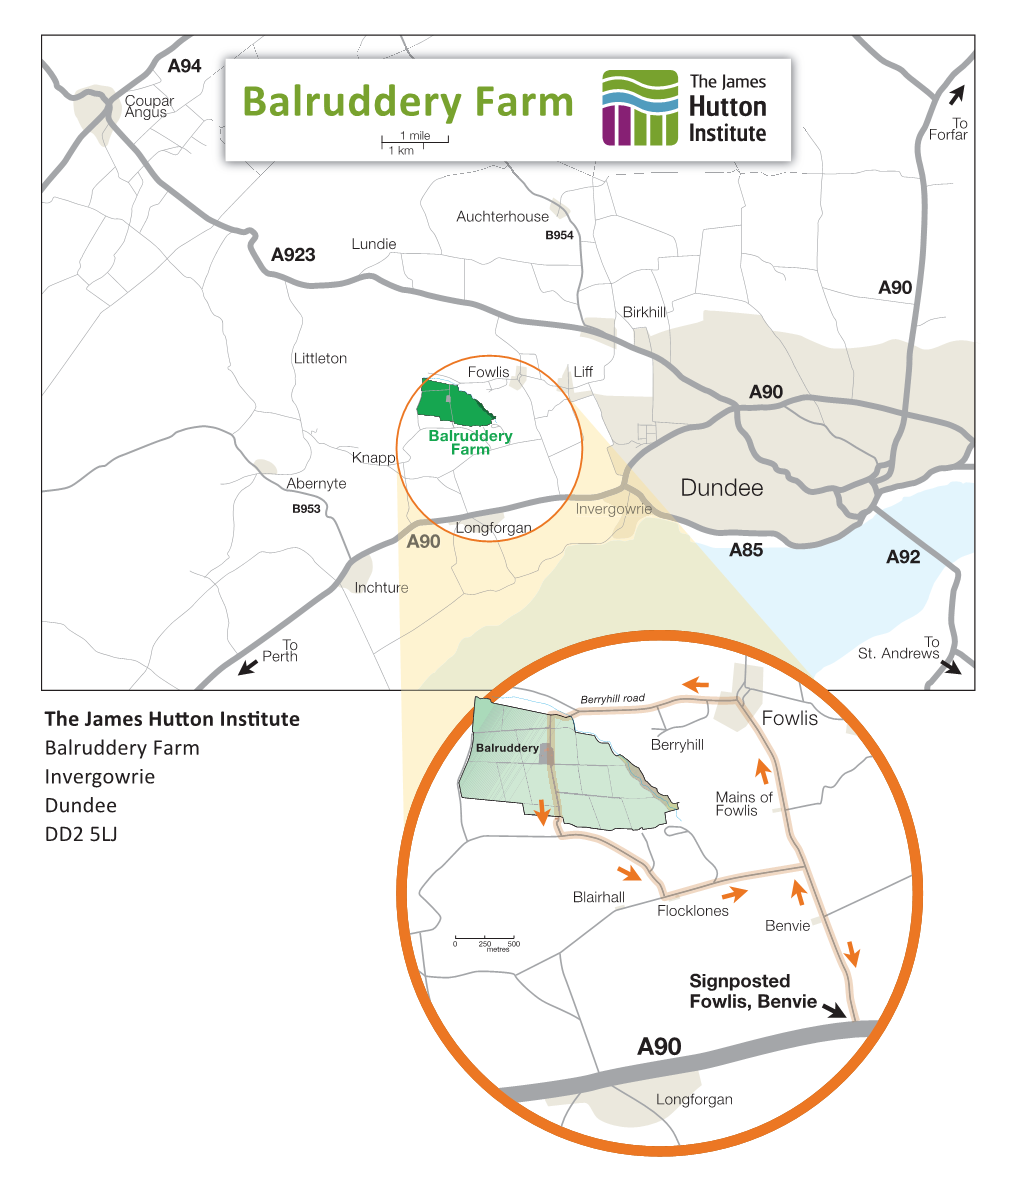 Location Map and Directions to Balruddery Farm